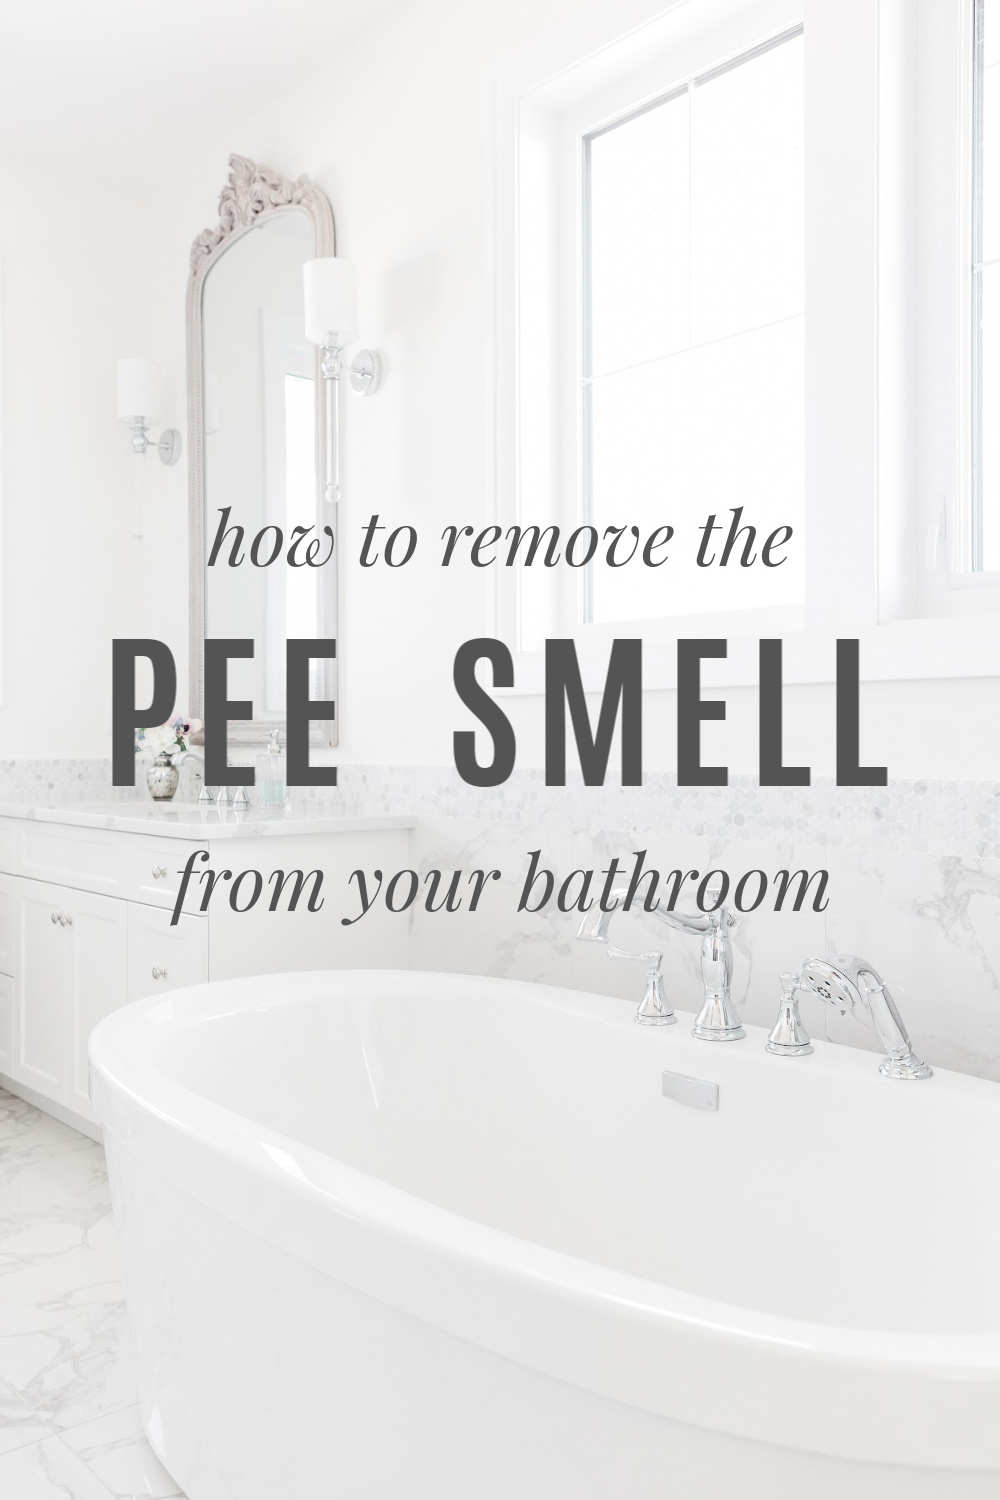 9 Ways To Get Rid Of Smell Paing, How To Get Urine Smell Out Of Bathroom Tile Floor